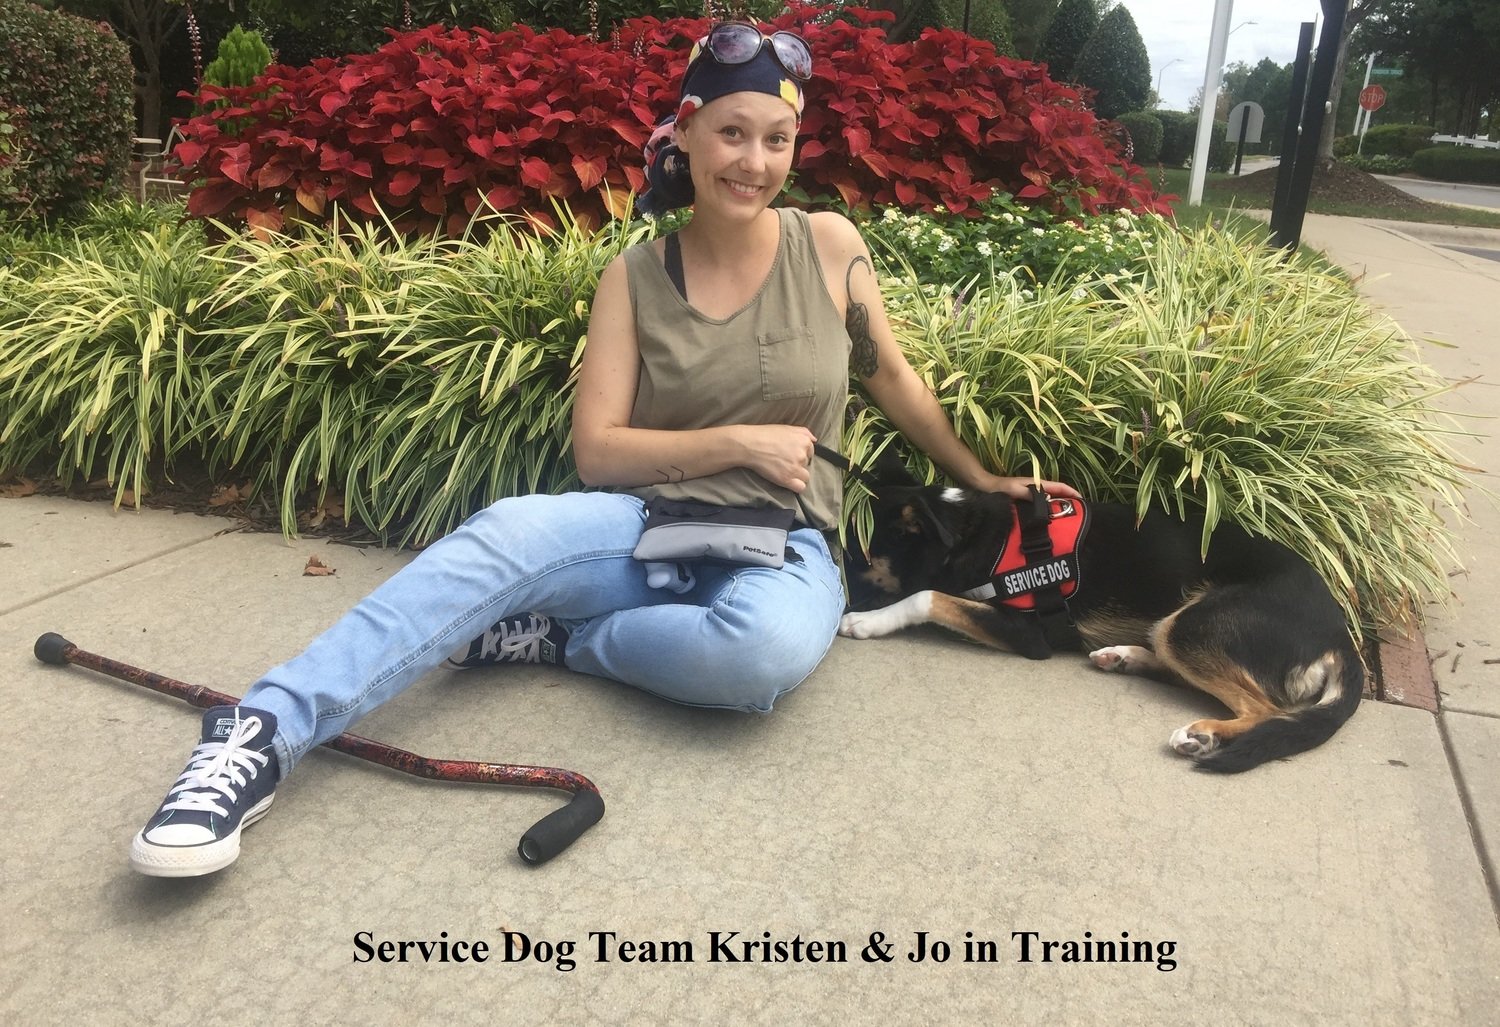 00017_Donate to Support Service Dog Team Kristen &amp; Jo: If You Choose to Give an Amount Which is Different From Available Donation Options, You can Combine Buttons.